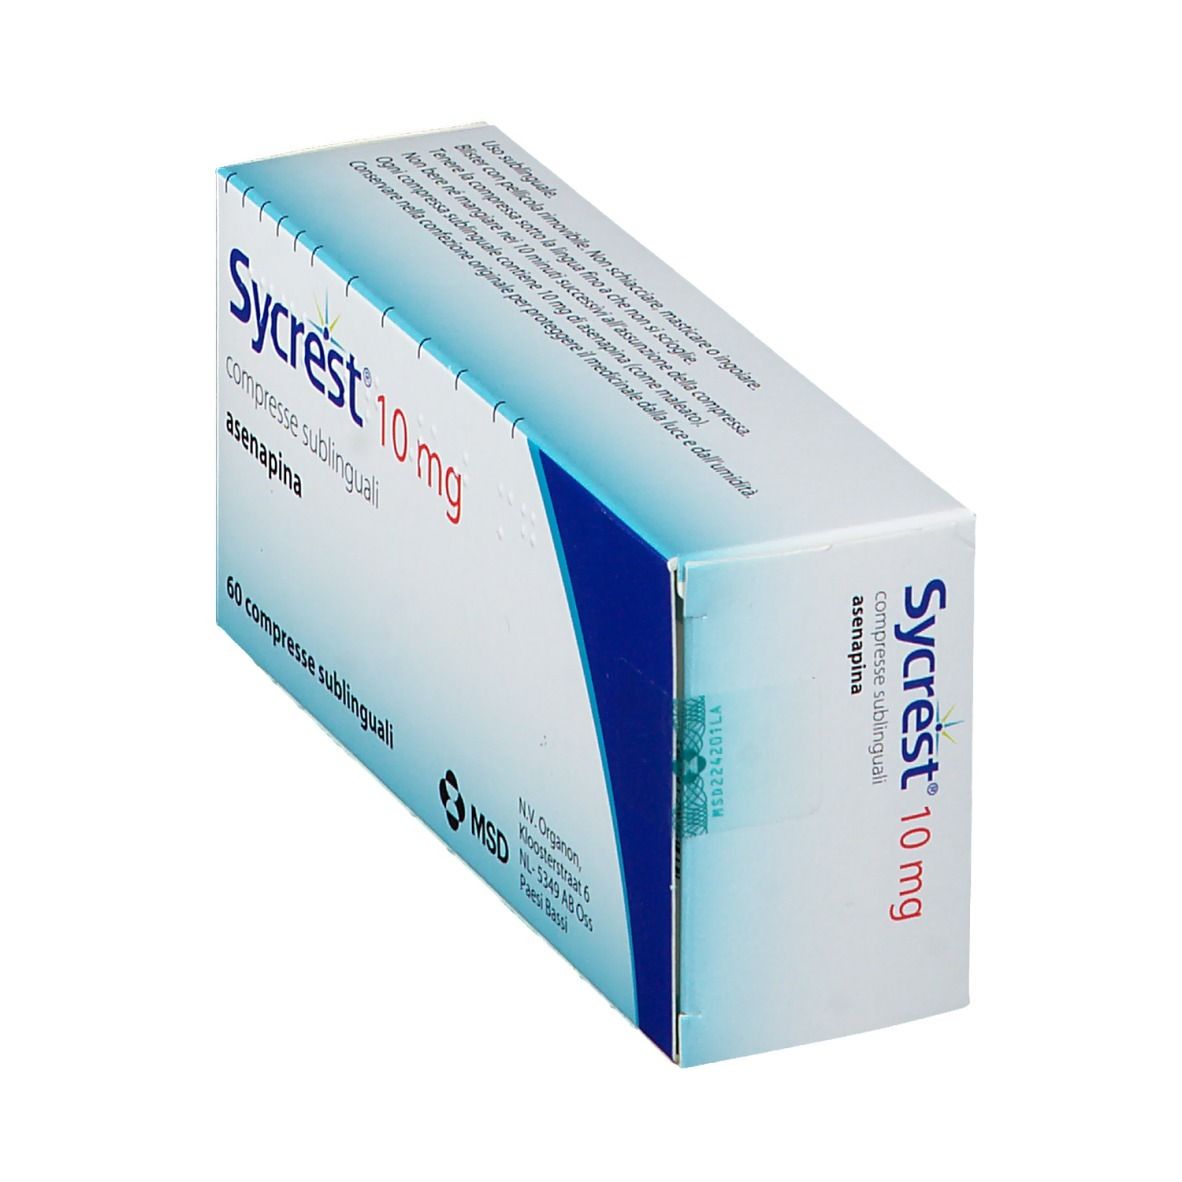 Sycrest® 10 mg